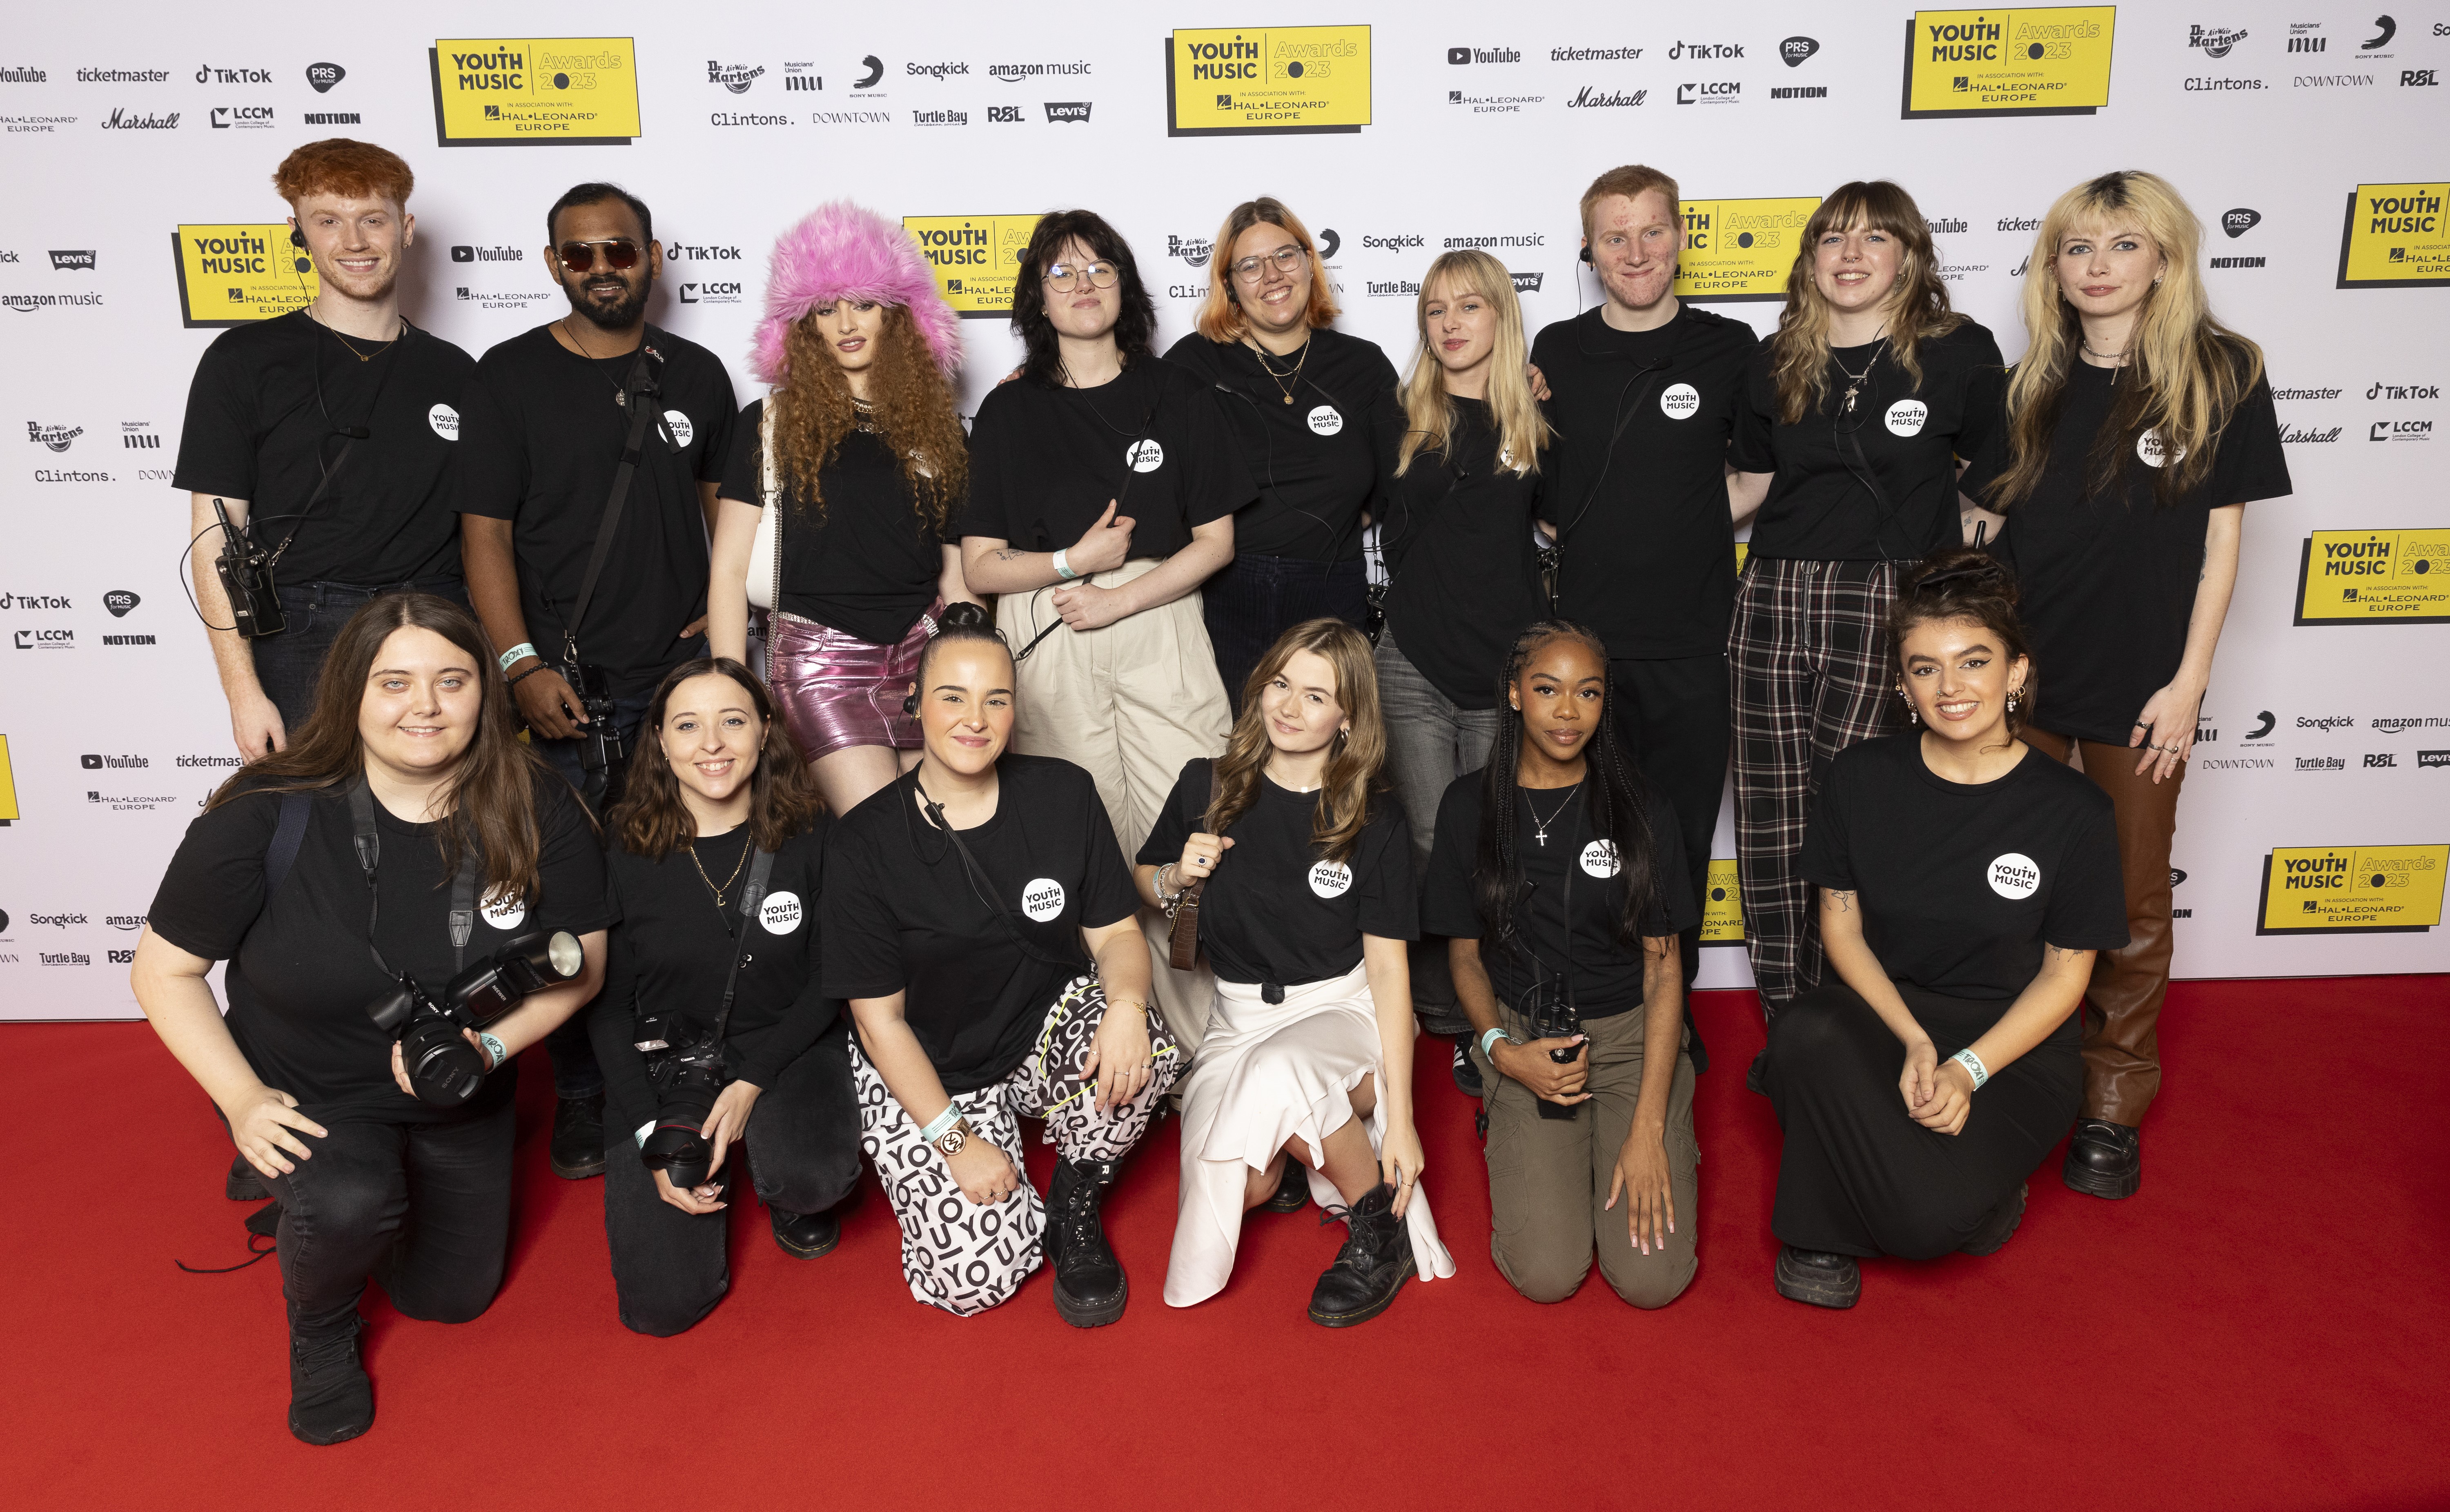 youth music nextgen pose on the red carpet